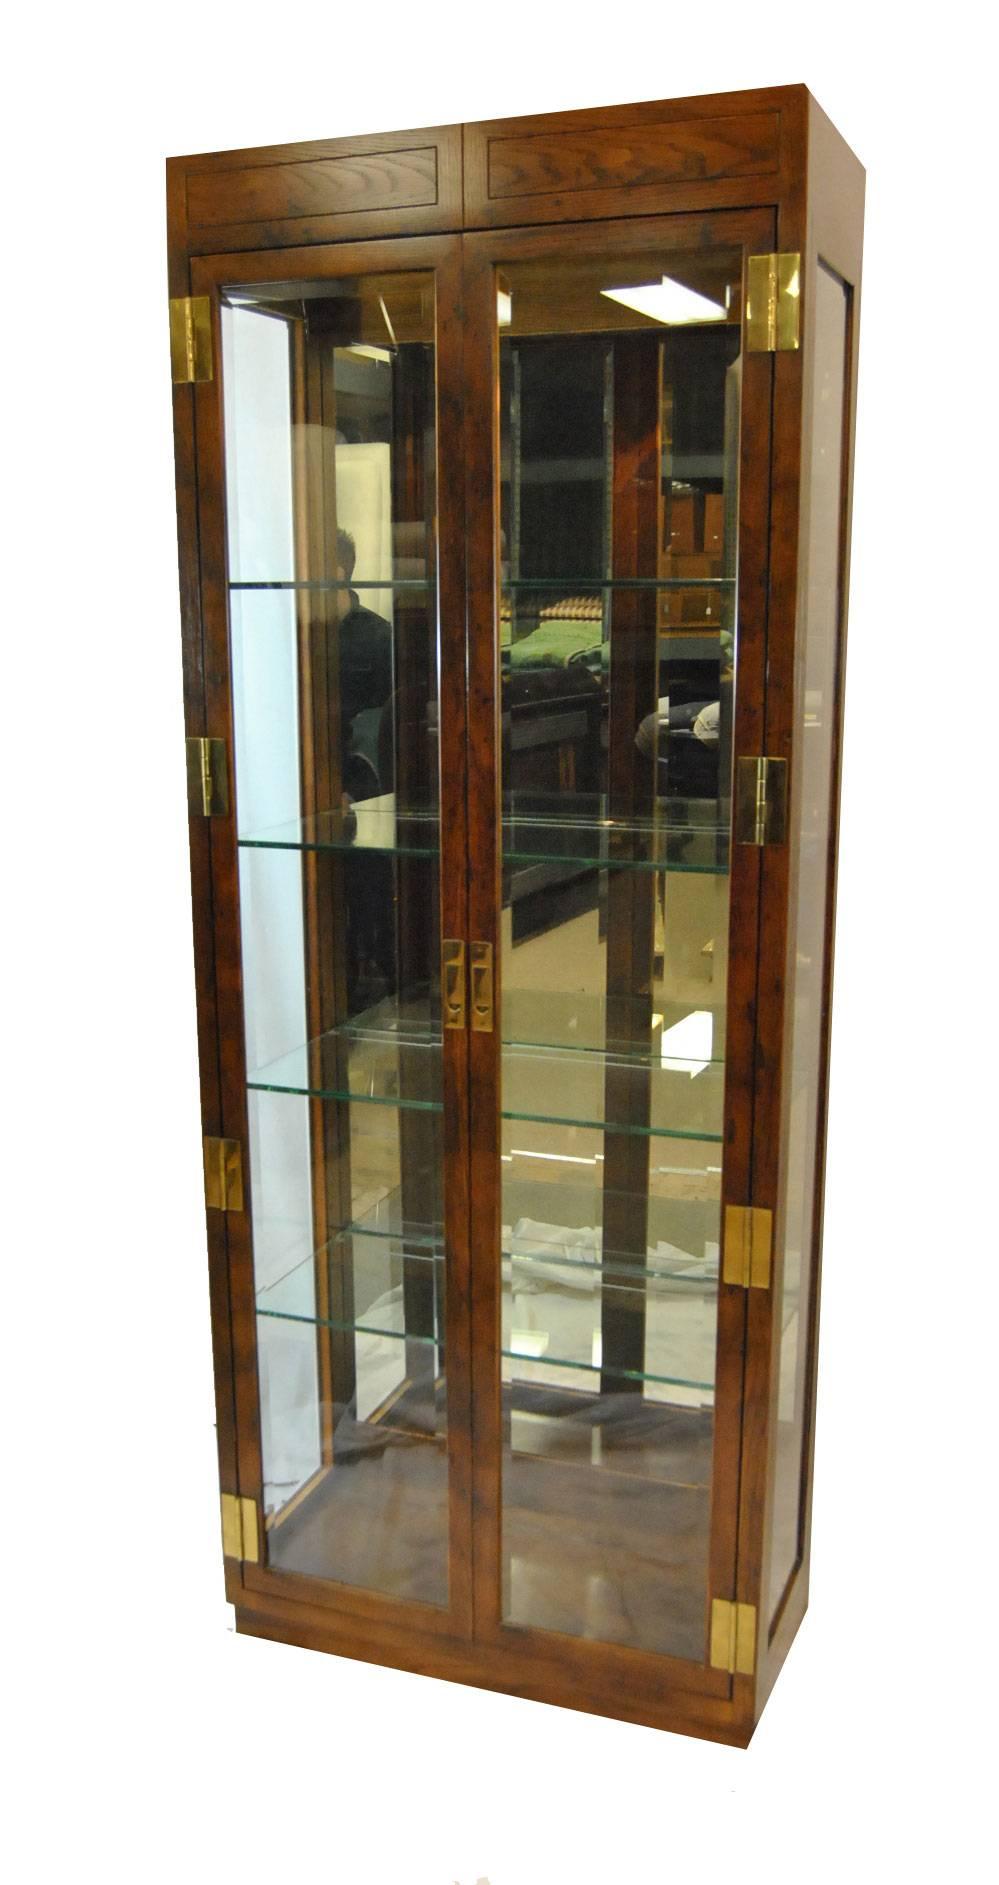 A great pair of Campaign style curio display cabinets. The cabinets feature two beveled glass doors which open to an interior with a mirrored back. There are 4 thick glass shelfs in each and two lights in the top. Heavy brass hardware adorns the